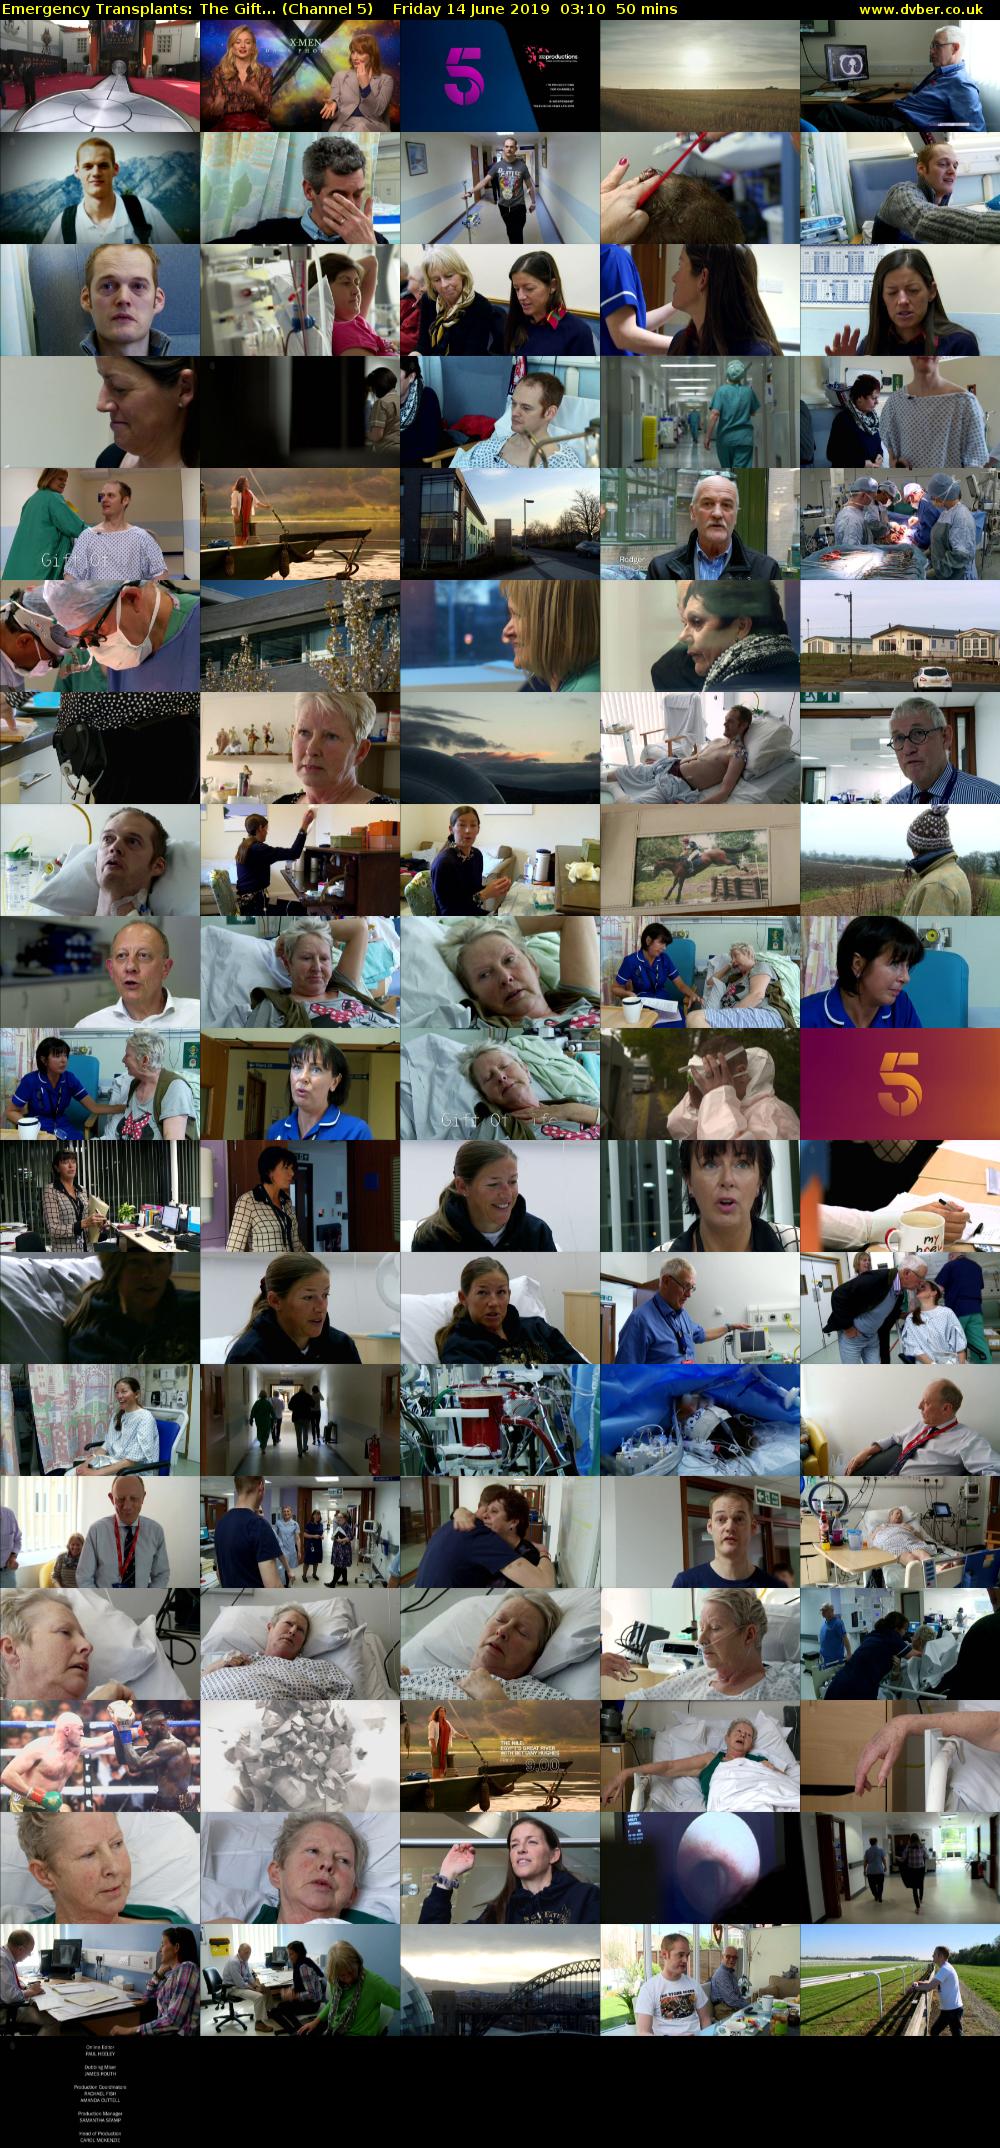 Emergency Transplants: The Gift... (Channel 5) Friday 14 June 2019 03:10 - 04:00